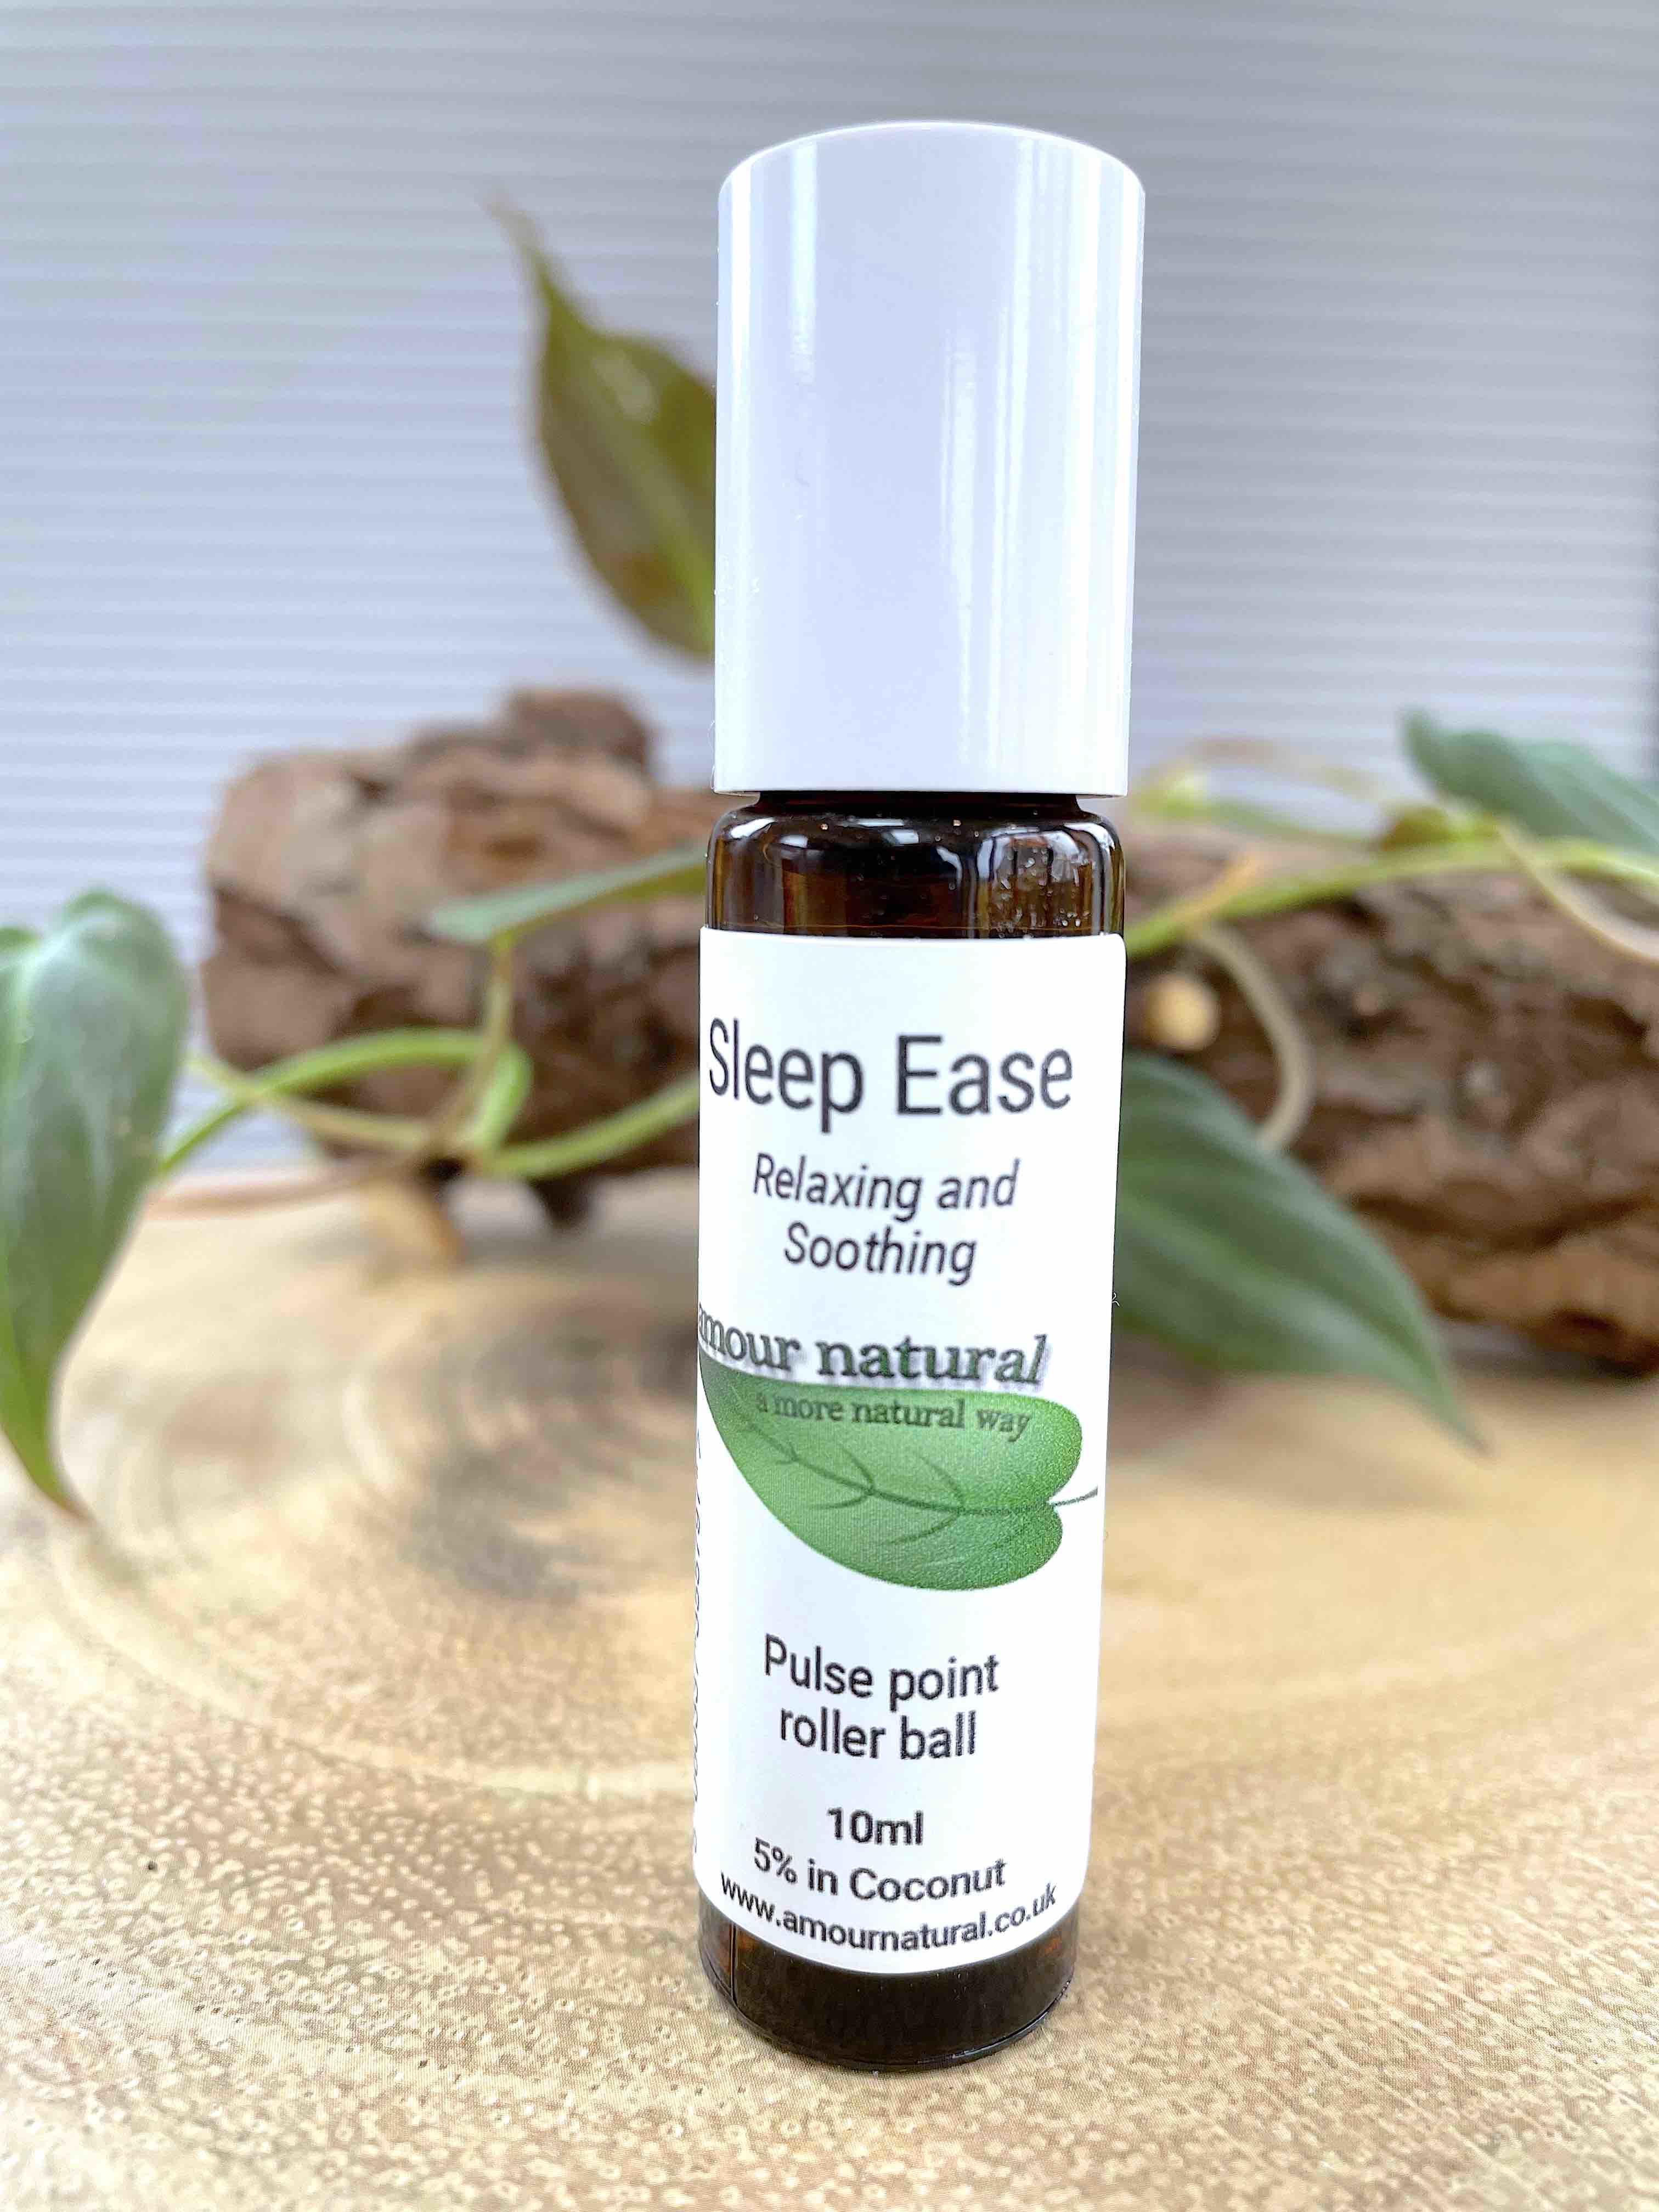 Sleep ease essential oil pulse point roller ball, aromatherapy, The Holistic Hamper